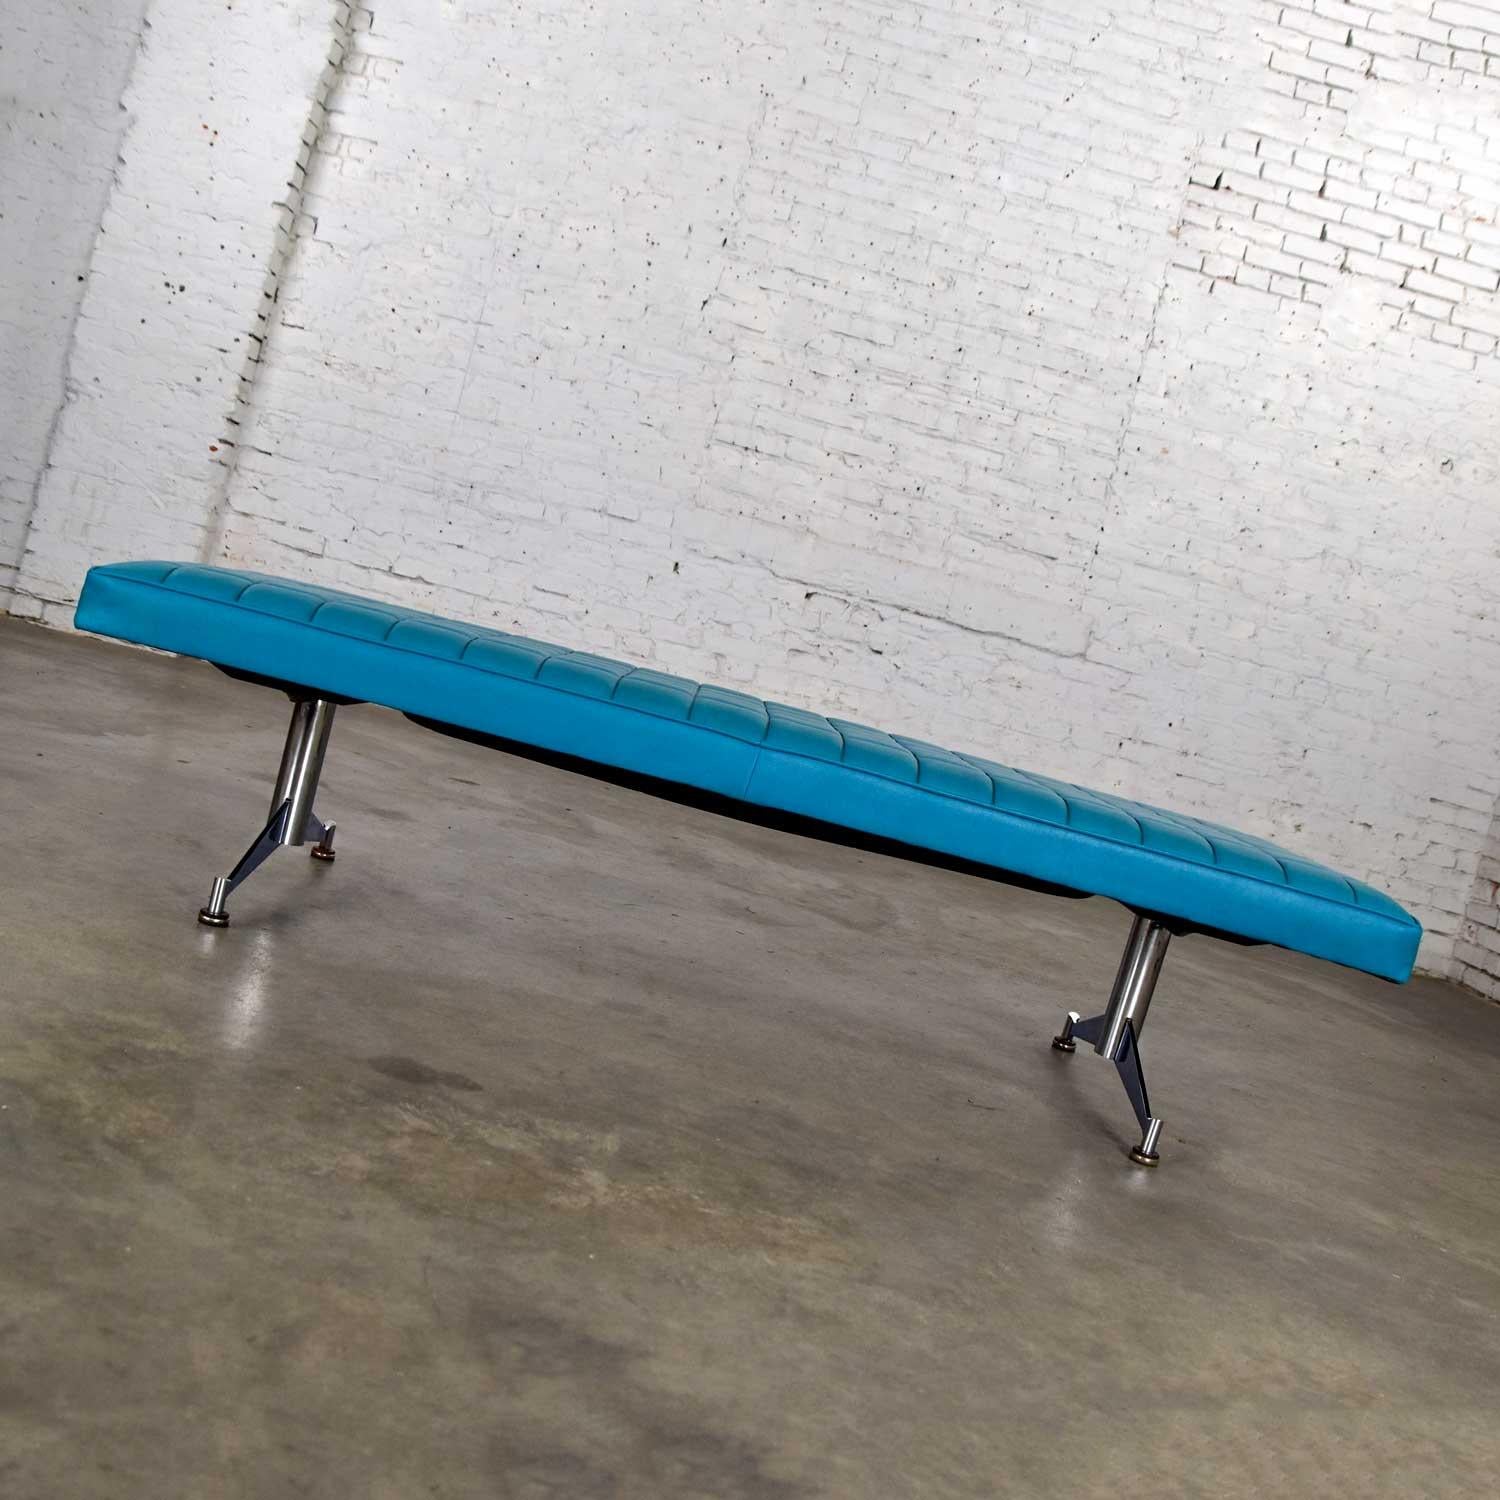 Madison Furn. Vinyl Faux Leather Turquoise Chrome Bench Daybed Style A. Umanoff For Sale 6